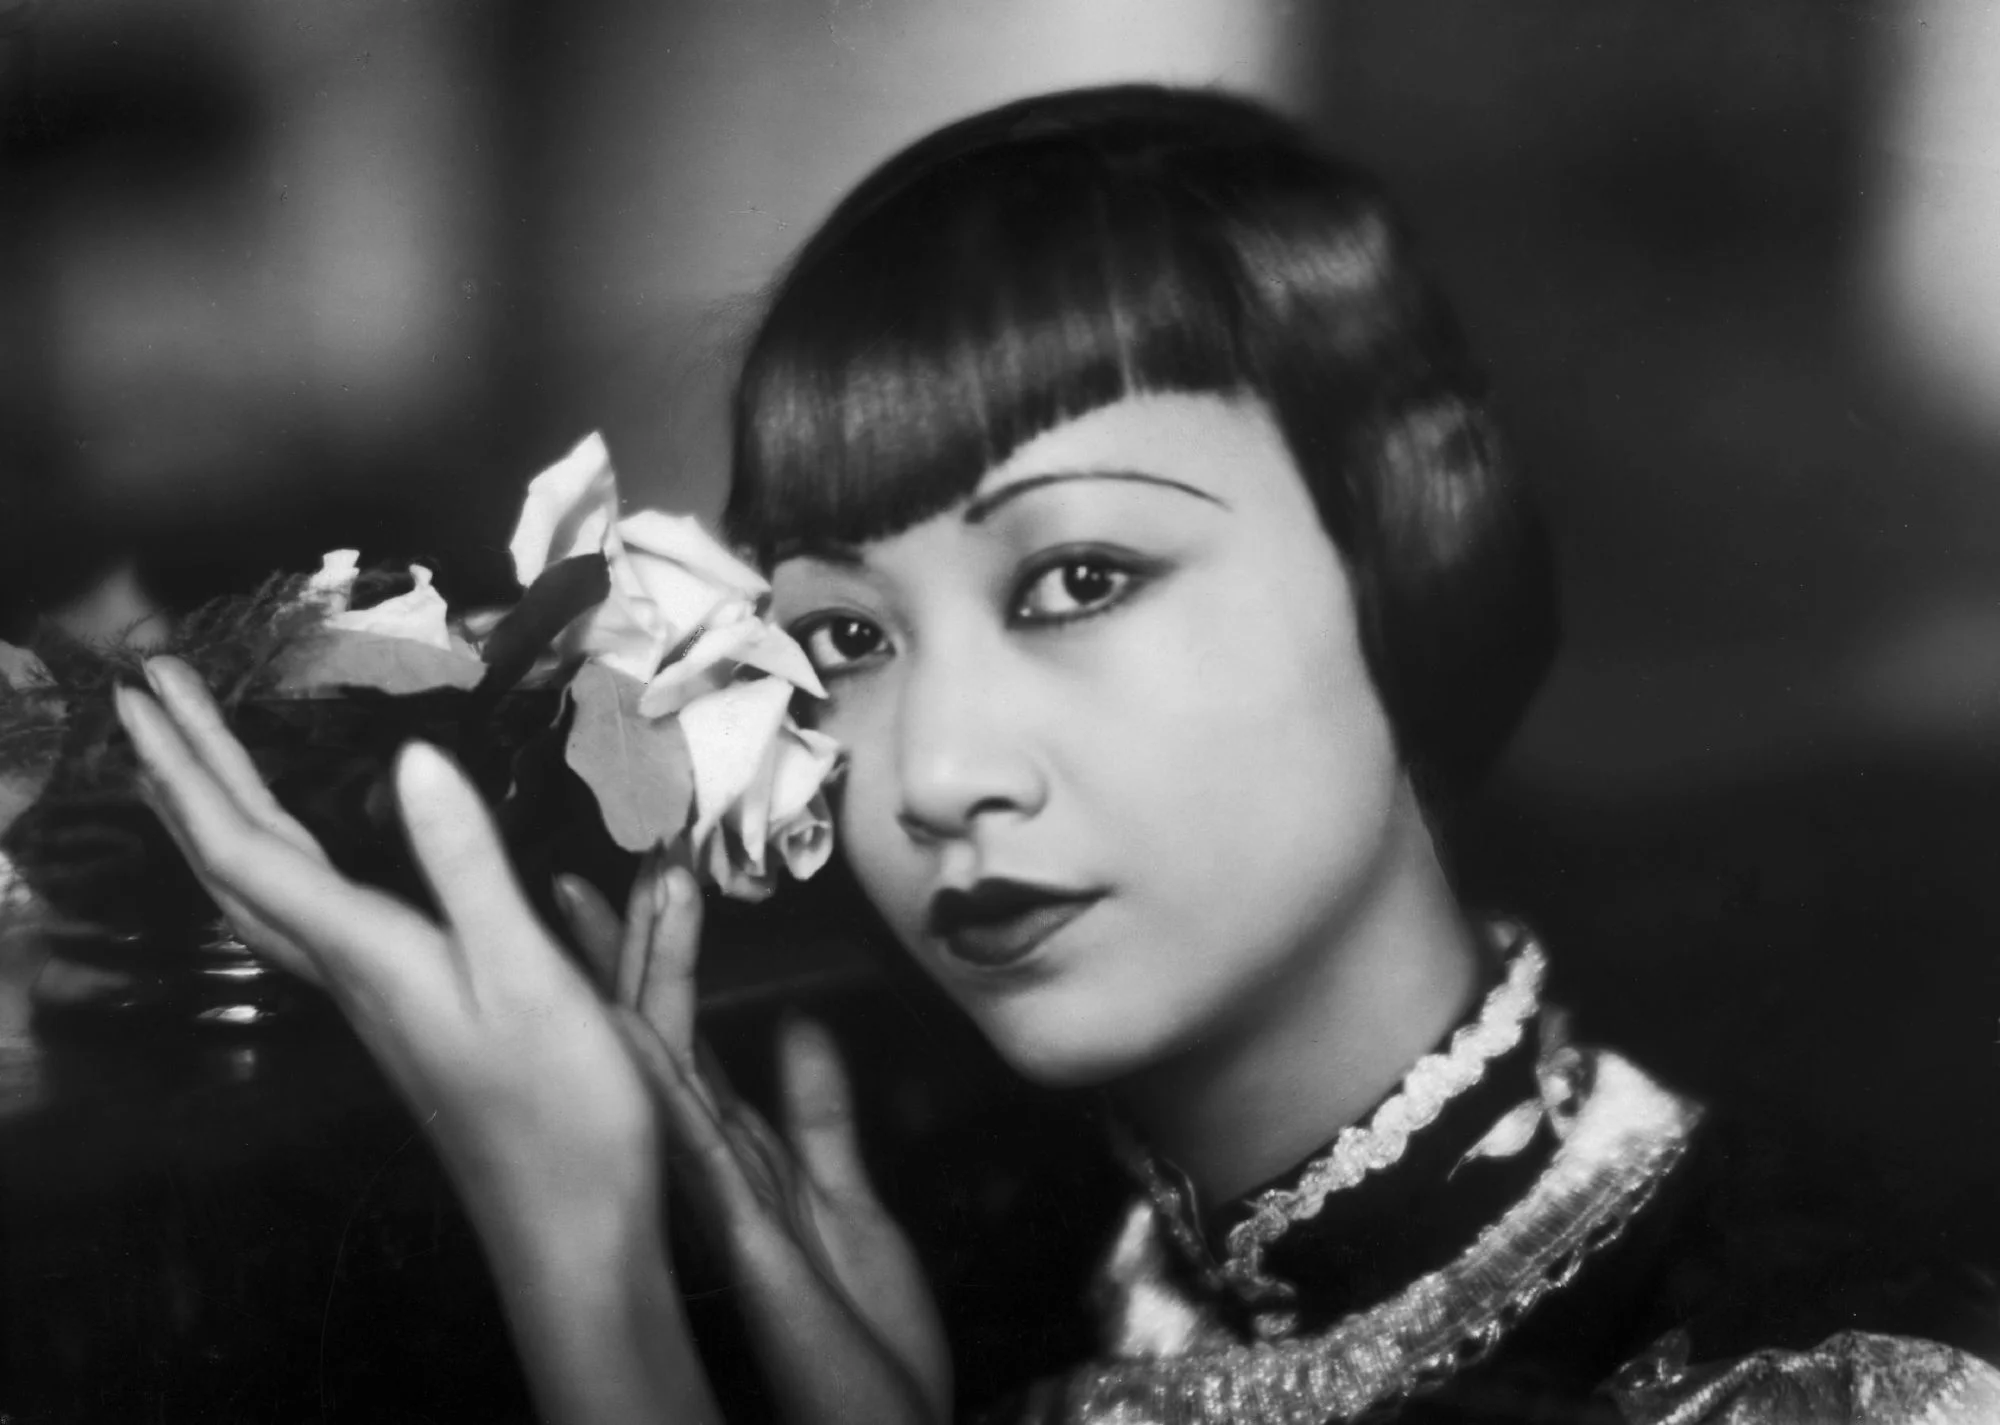 Wong starred in the first (with an asterisk) Technicolor feature